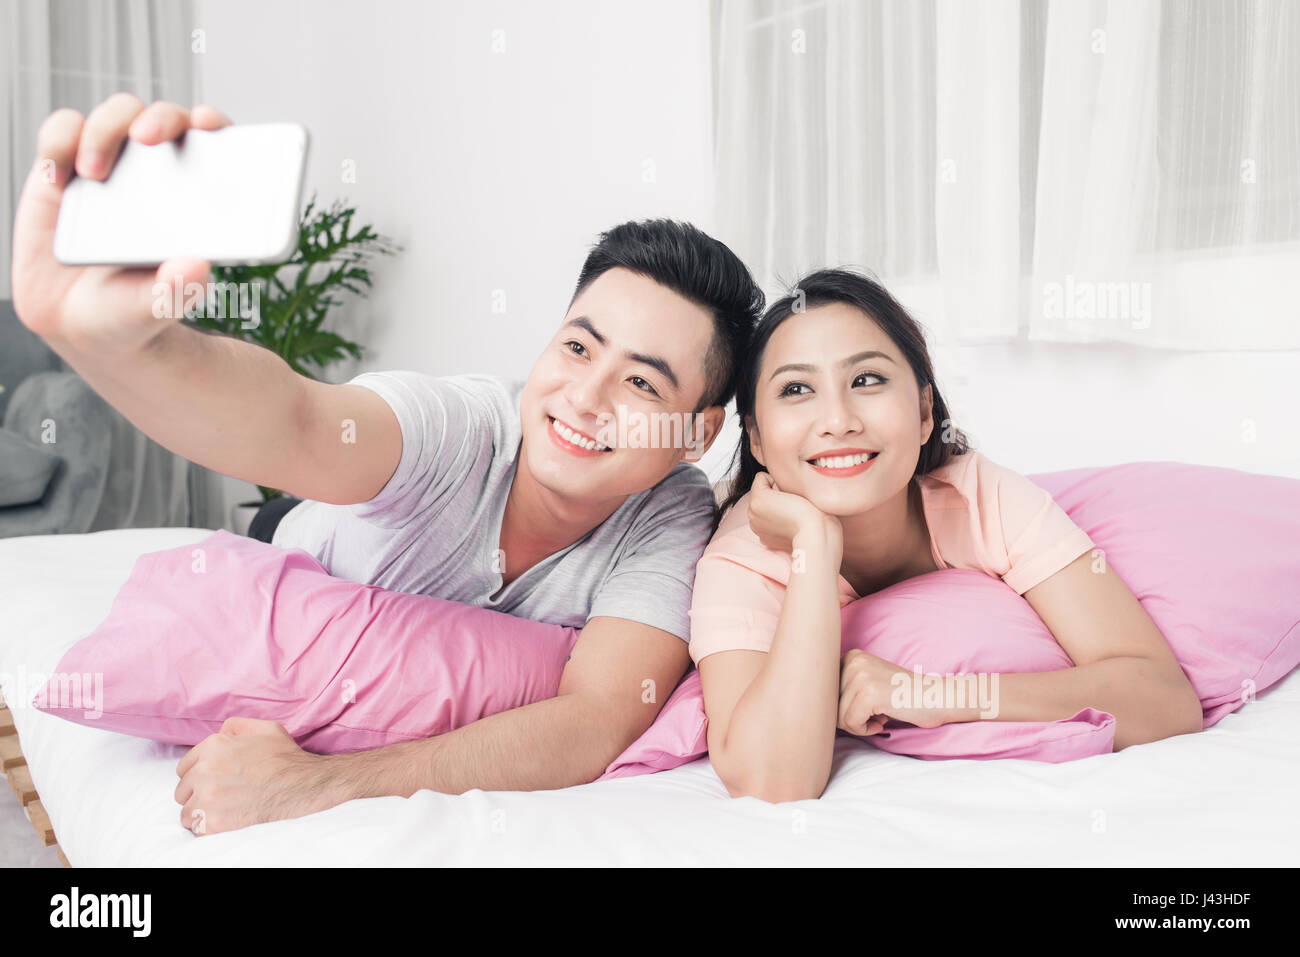 Couple taking selfie with phone lying on bed. Stock Photo